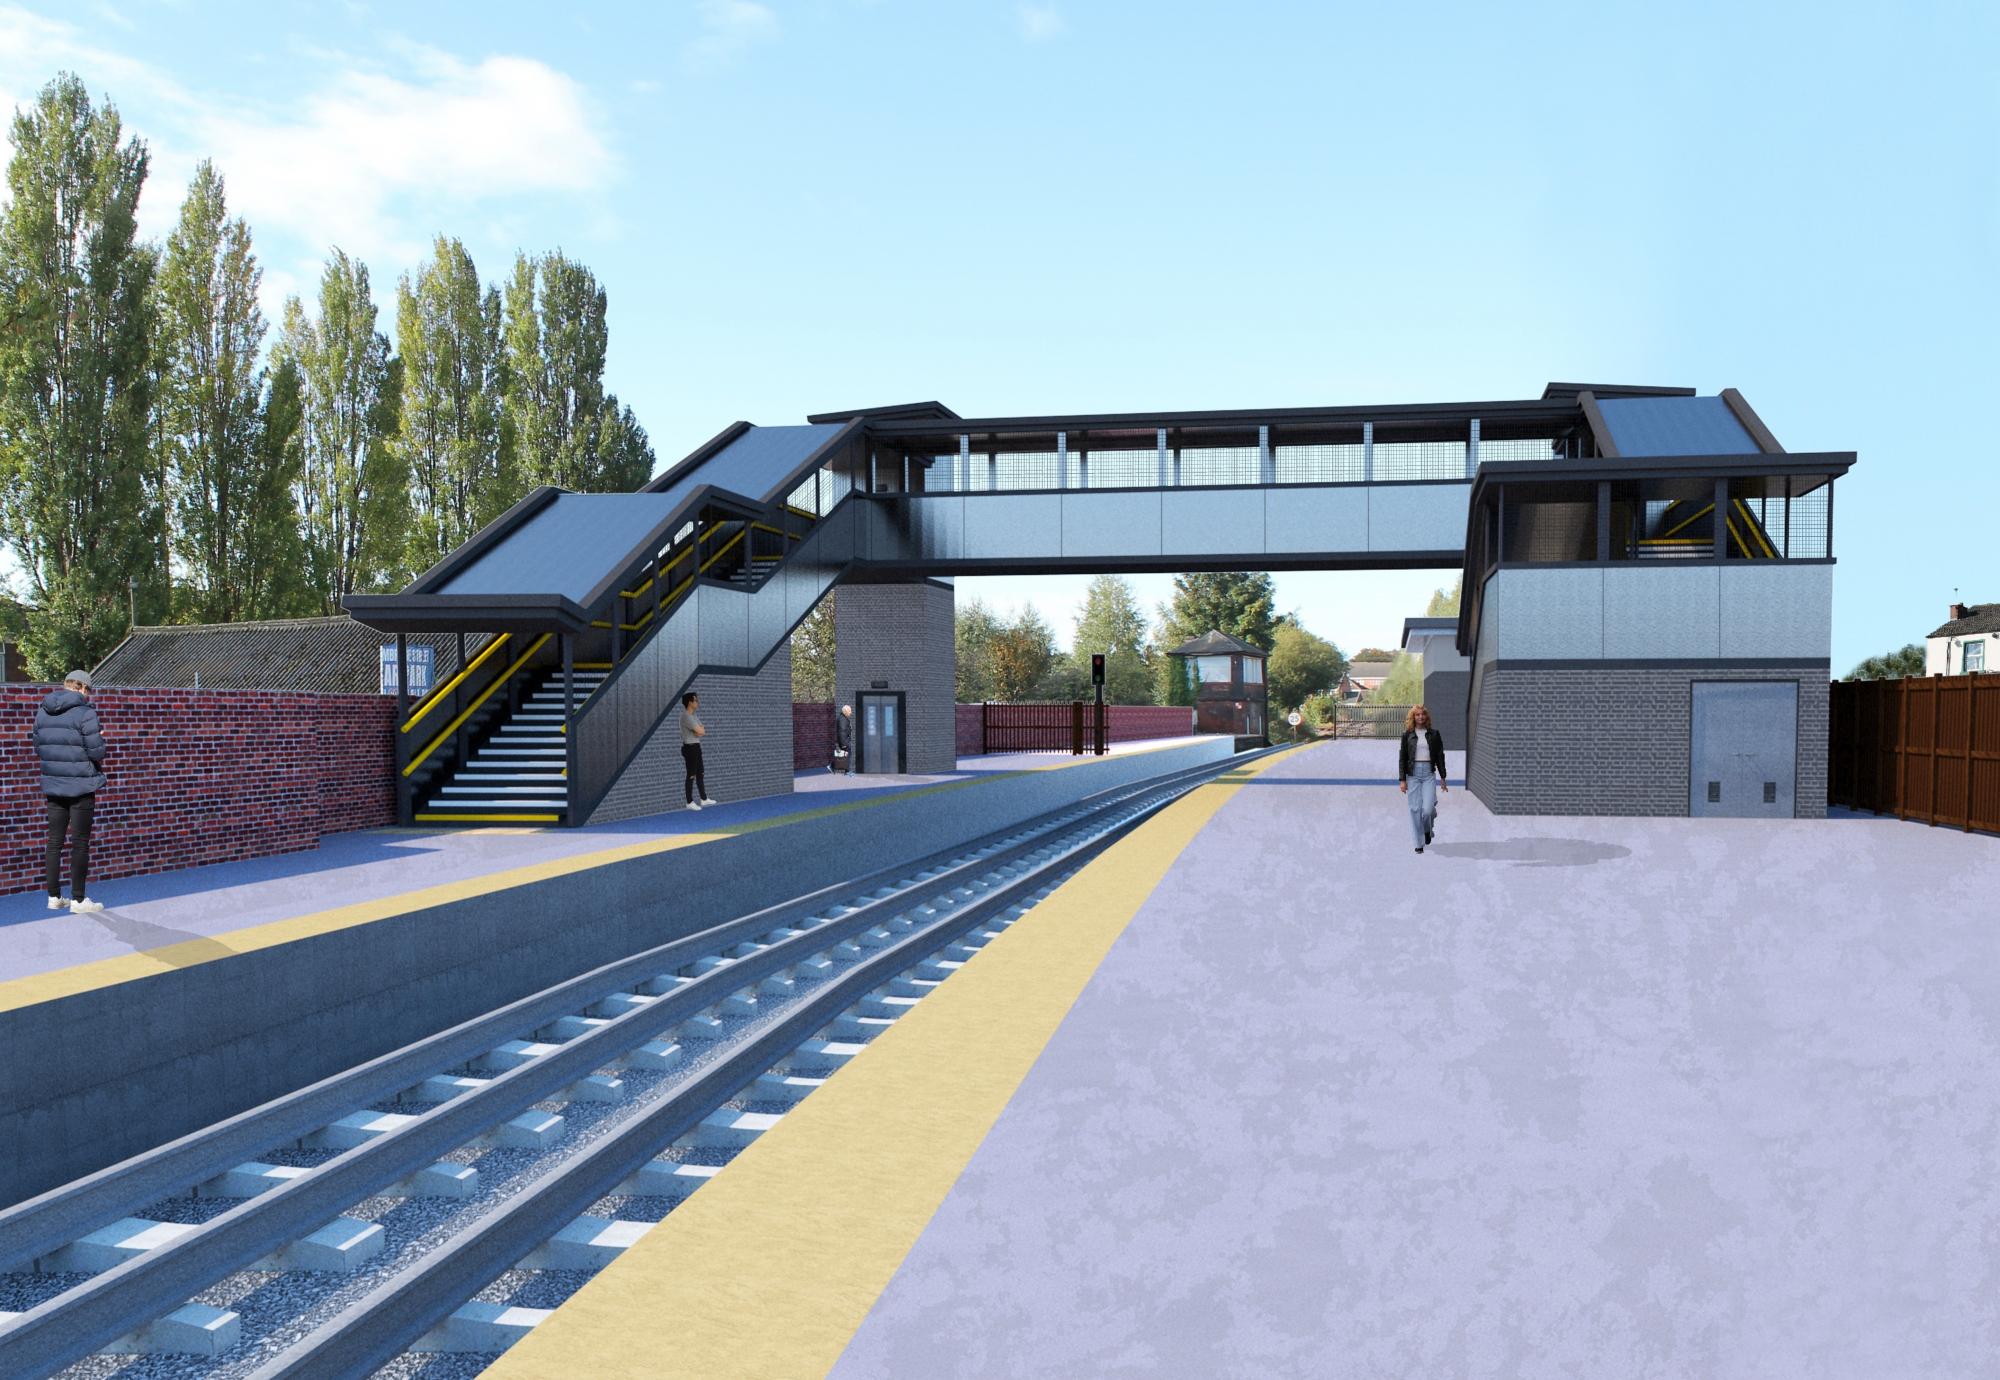 Second platform virtual view, from Network Rail 